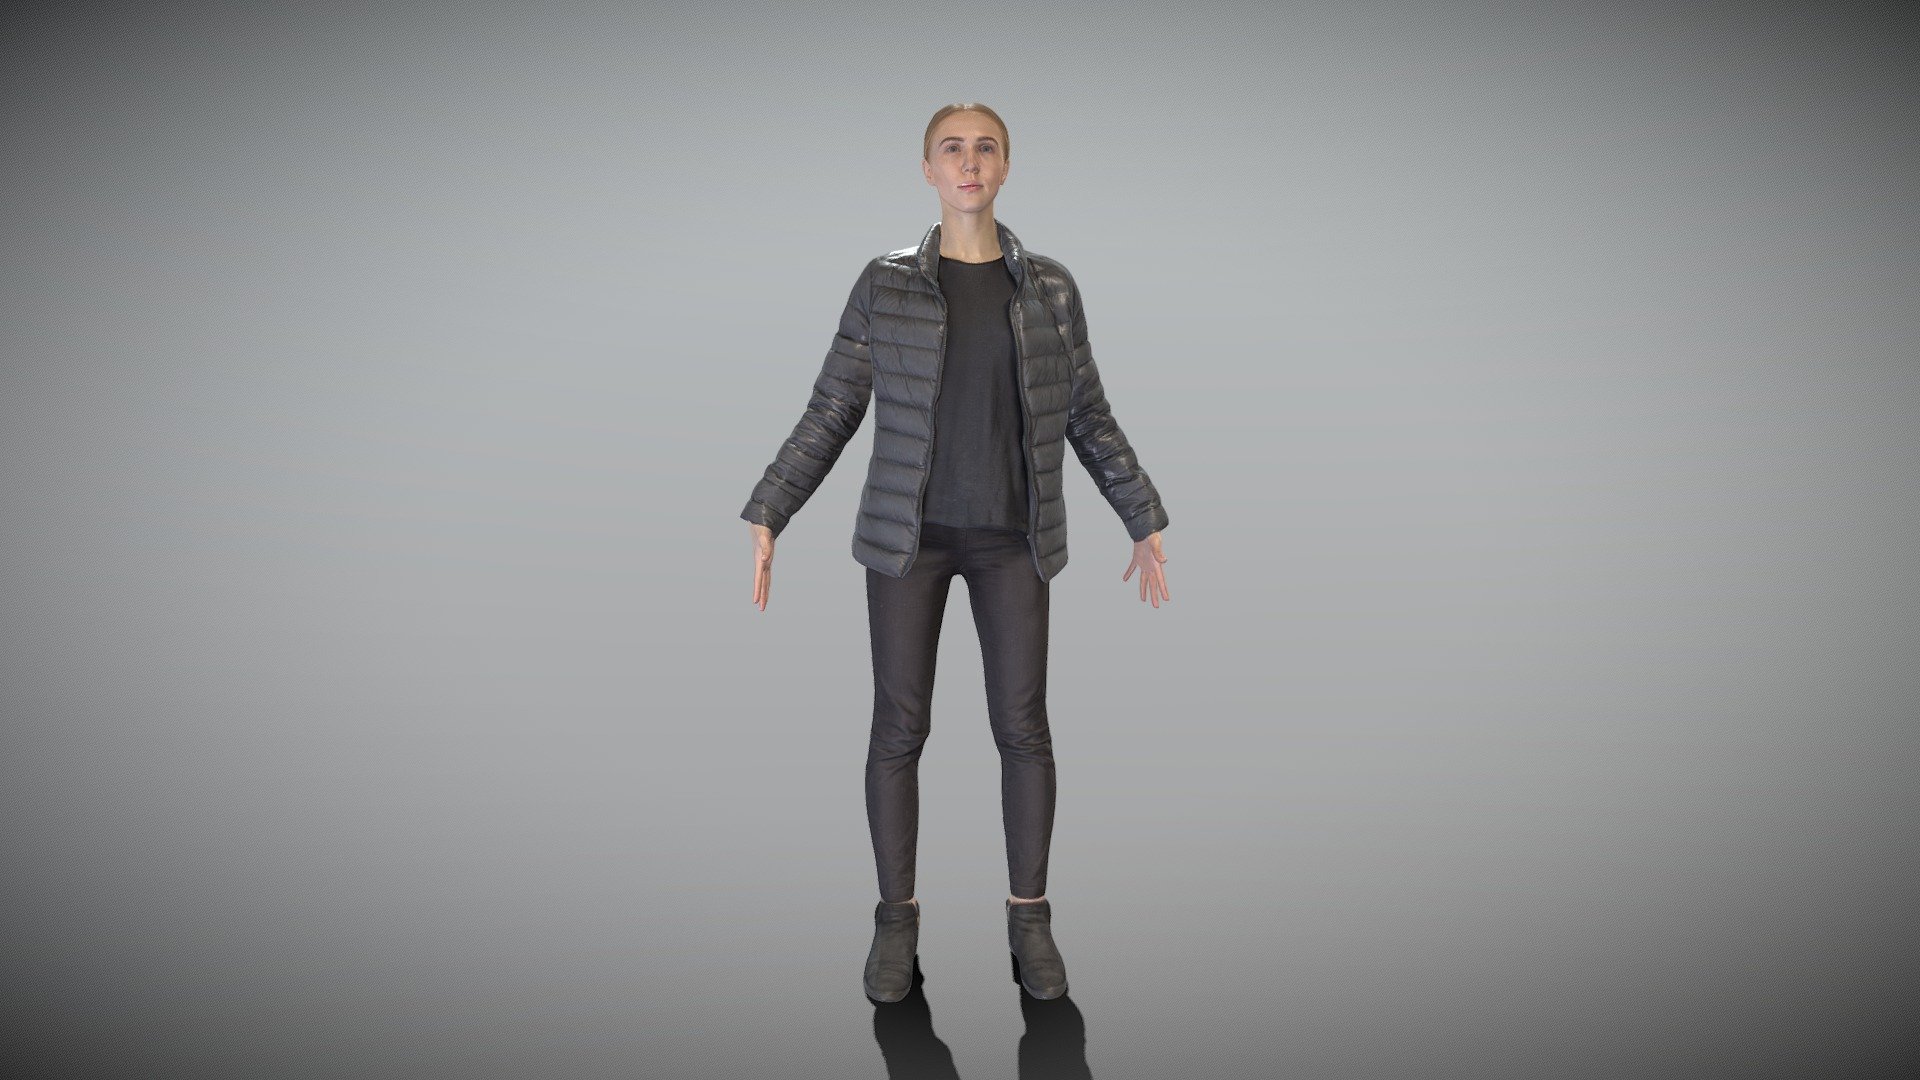 This is a true human size detailed model of a beautiful young woman of Caucasian appearance dressed in street style. The model is captured in the A-pose with mesh ready for rigging and animation in all most usable 3d software.

Technical specifications:




digital double scan model

low-poly model

high-poly model (.ztl tool with 5-6 subdivisions) clean and retopologized automatically via ZRemesher

fully quad topology

sufficiently clean

edge Loops based

ready for subdivision

8K texture color map

non-overlapping UV map

ready for animation

PBR textures 8K resolution: Normal, Displacement, Albedo maps

Download package includes a Cinema 4D project file with Redshift shader, OBJ, FBX, STL files, which are applicable for 3ds Max, Maya, Unreal Engine, Unity, Blender, etc. All the textures you will find in the “Tex” folder, included into the main archive.

3D EVERYTHING

Stand with Ukraine! - Beautiful woman in street style in A-pose 456 - Buy Royalty Free 3D model by deep3dstudio 3d model